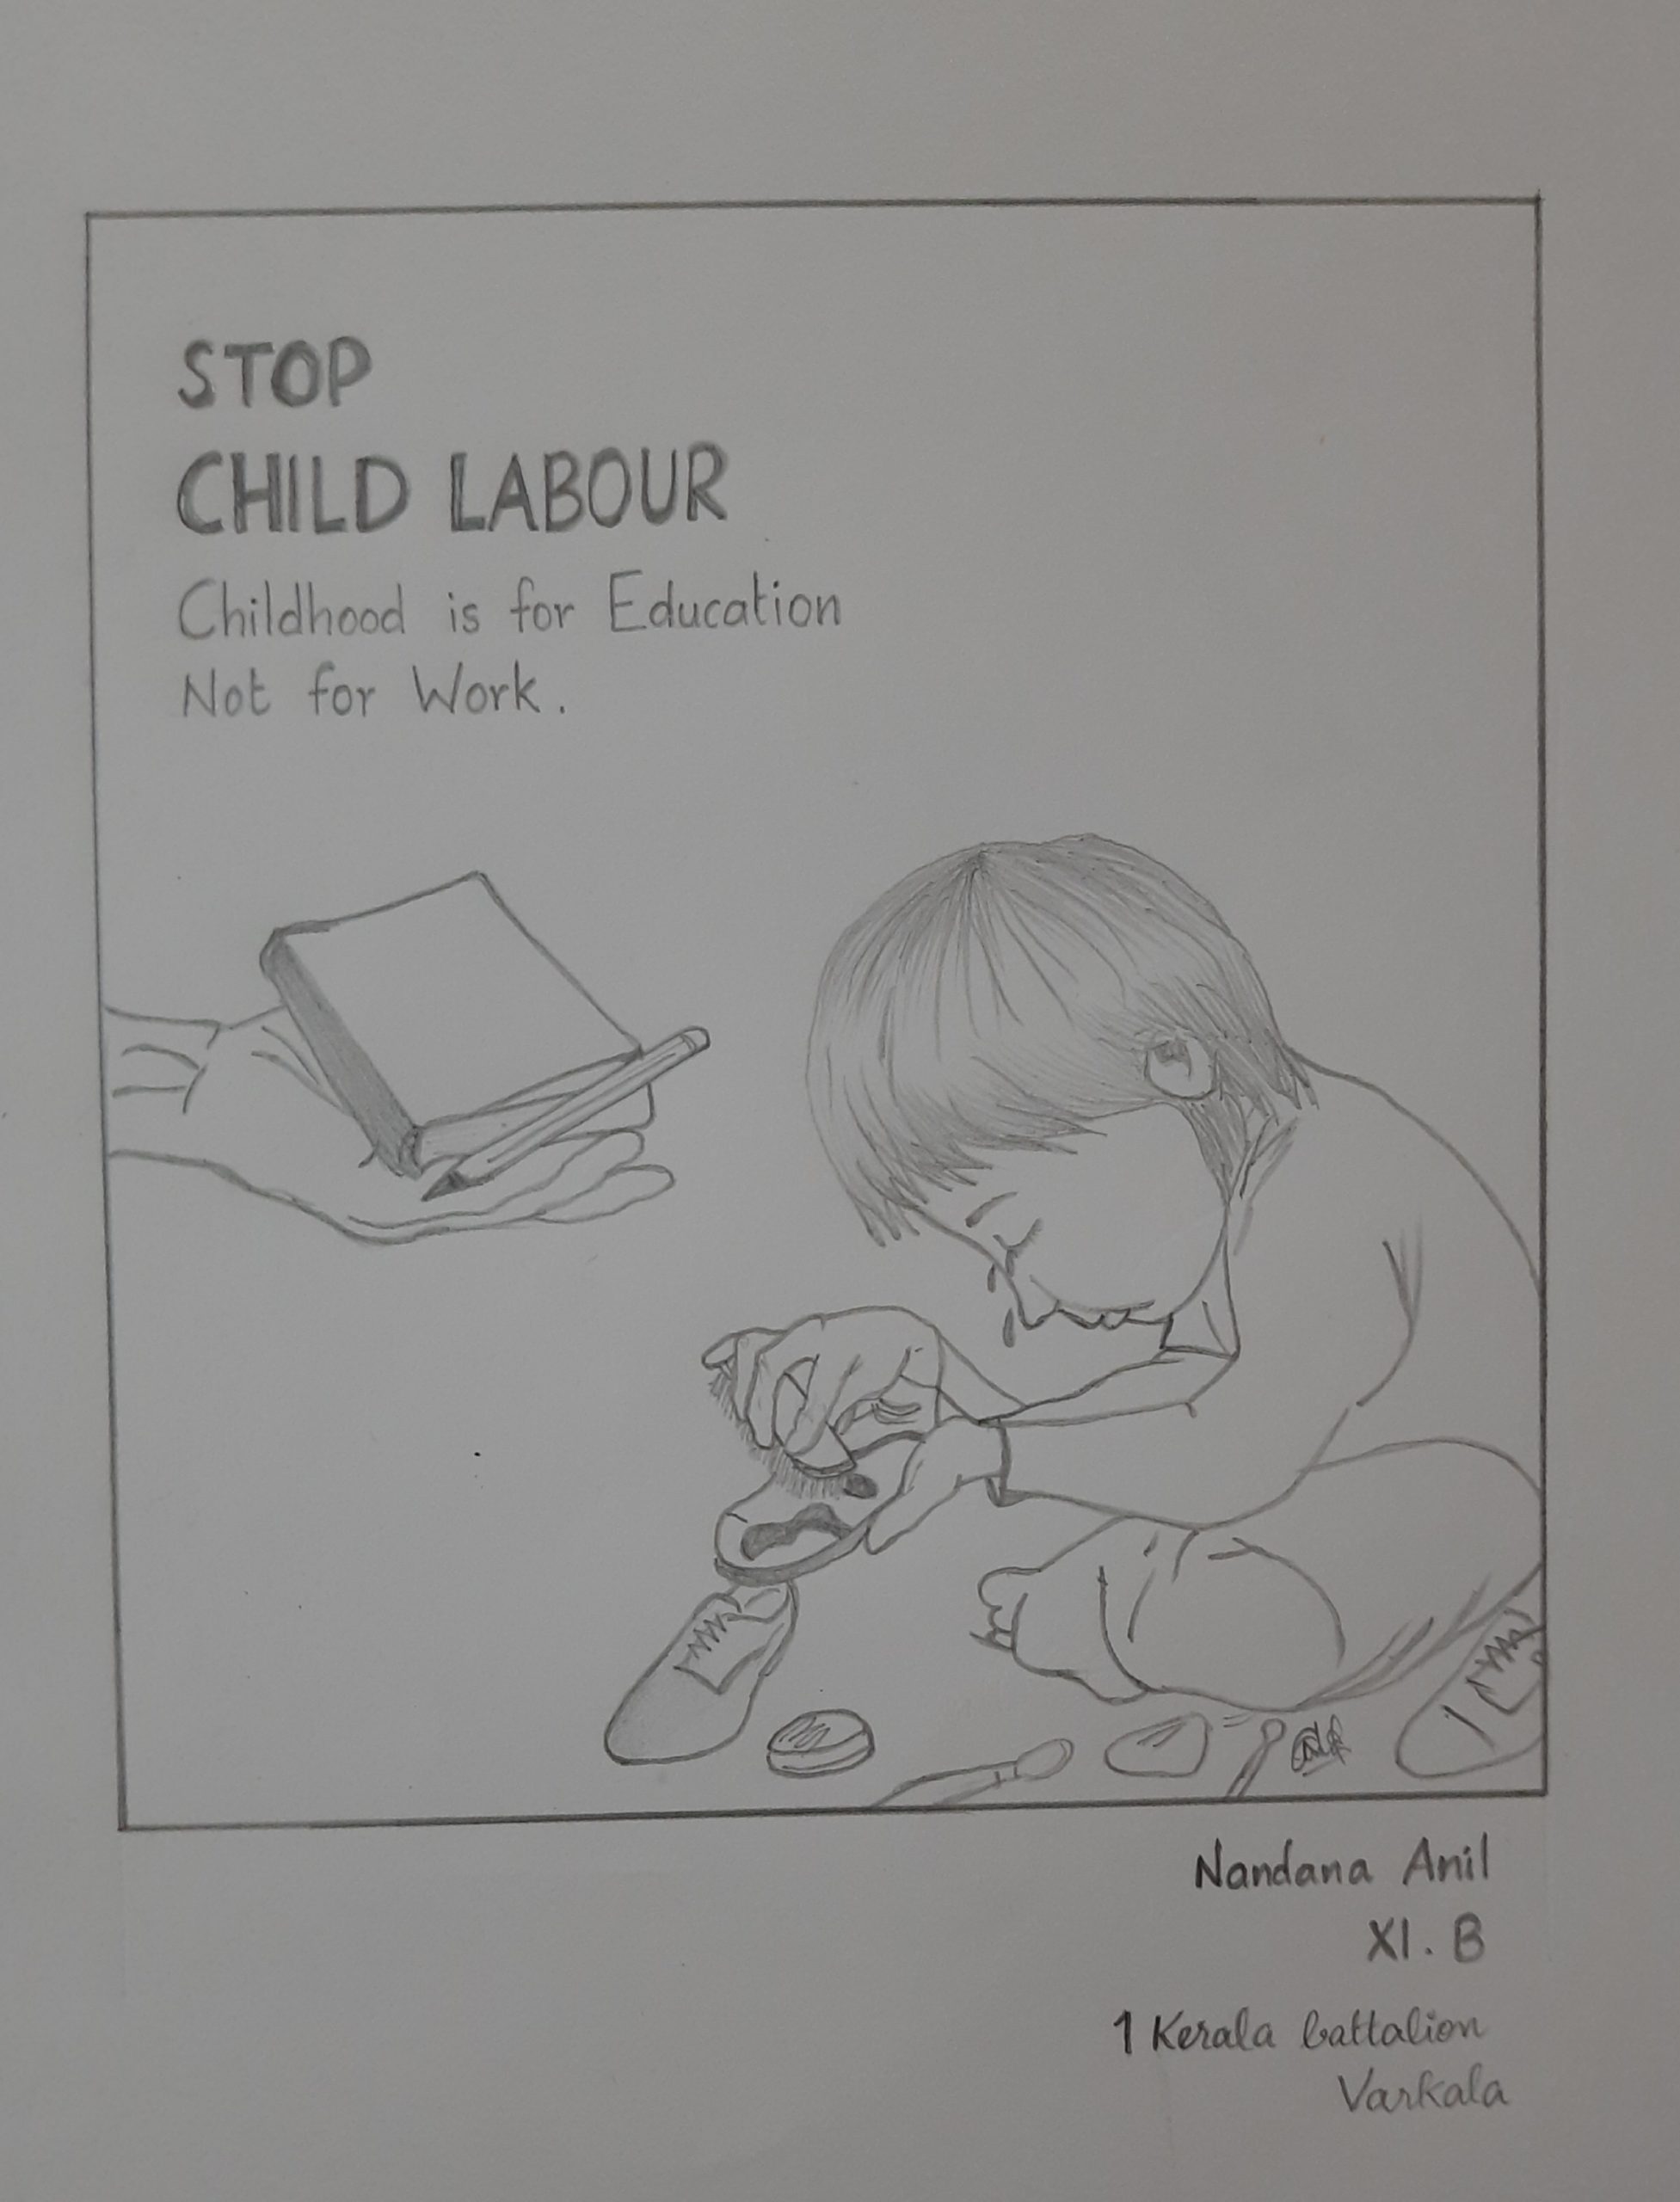 LET'S SAFEGUARD THE DIGNITY OF CHILDREN & STOP CHILD LABOUR!